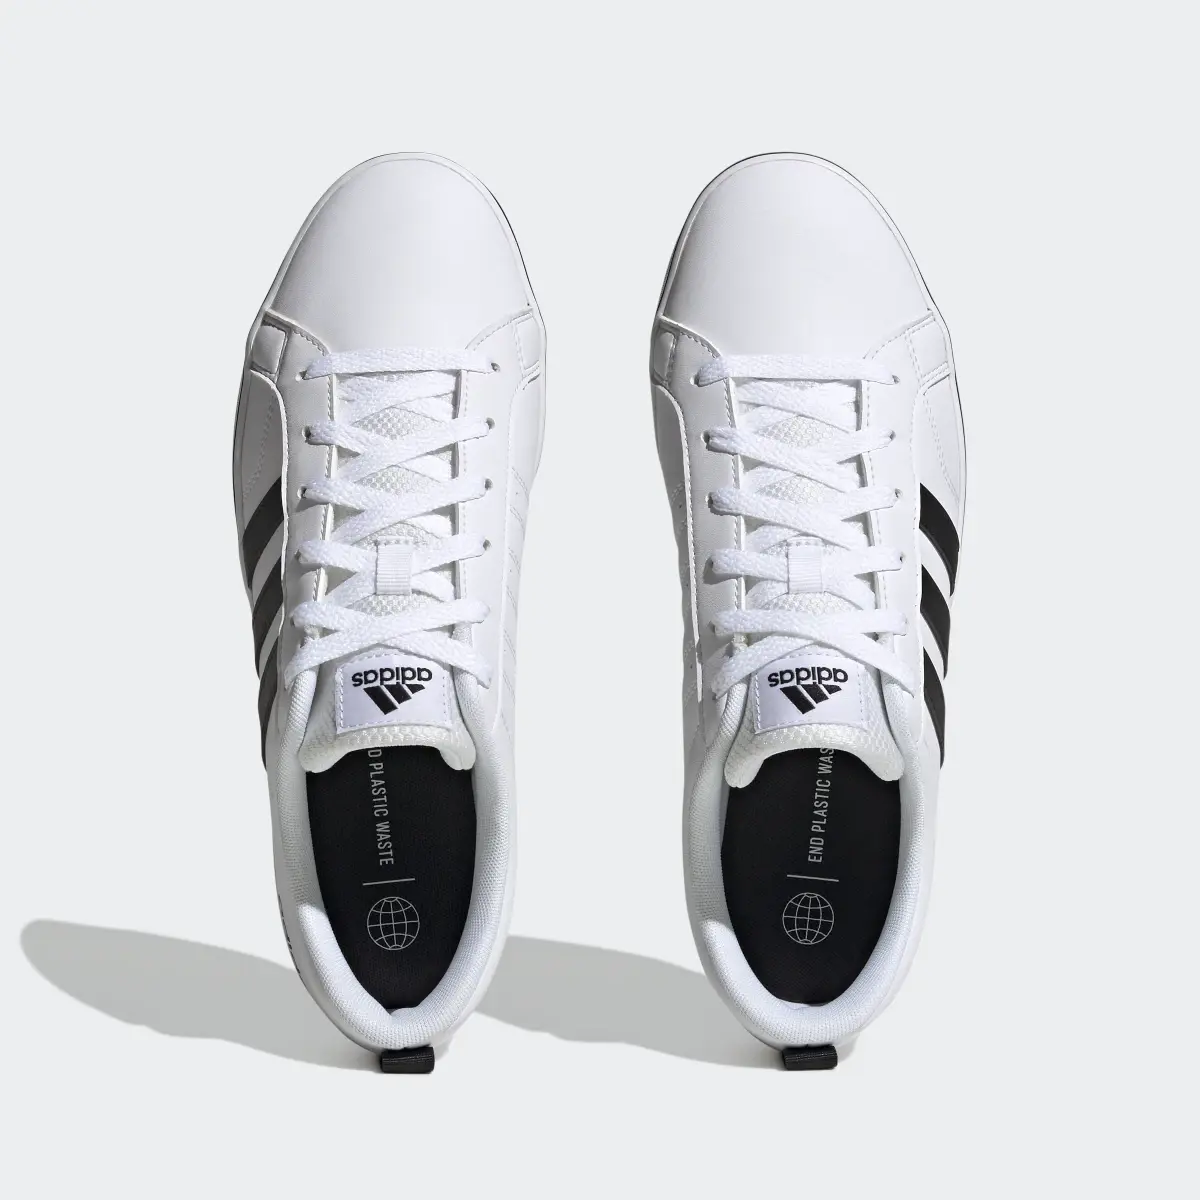 Adidas VS Pace 2.0 Shoes. 3